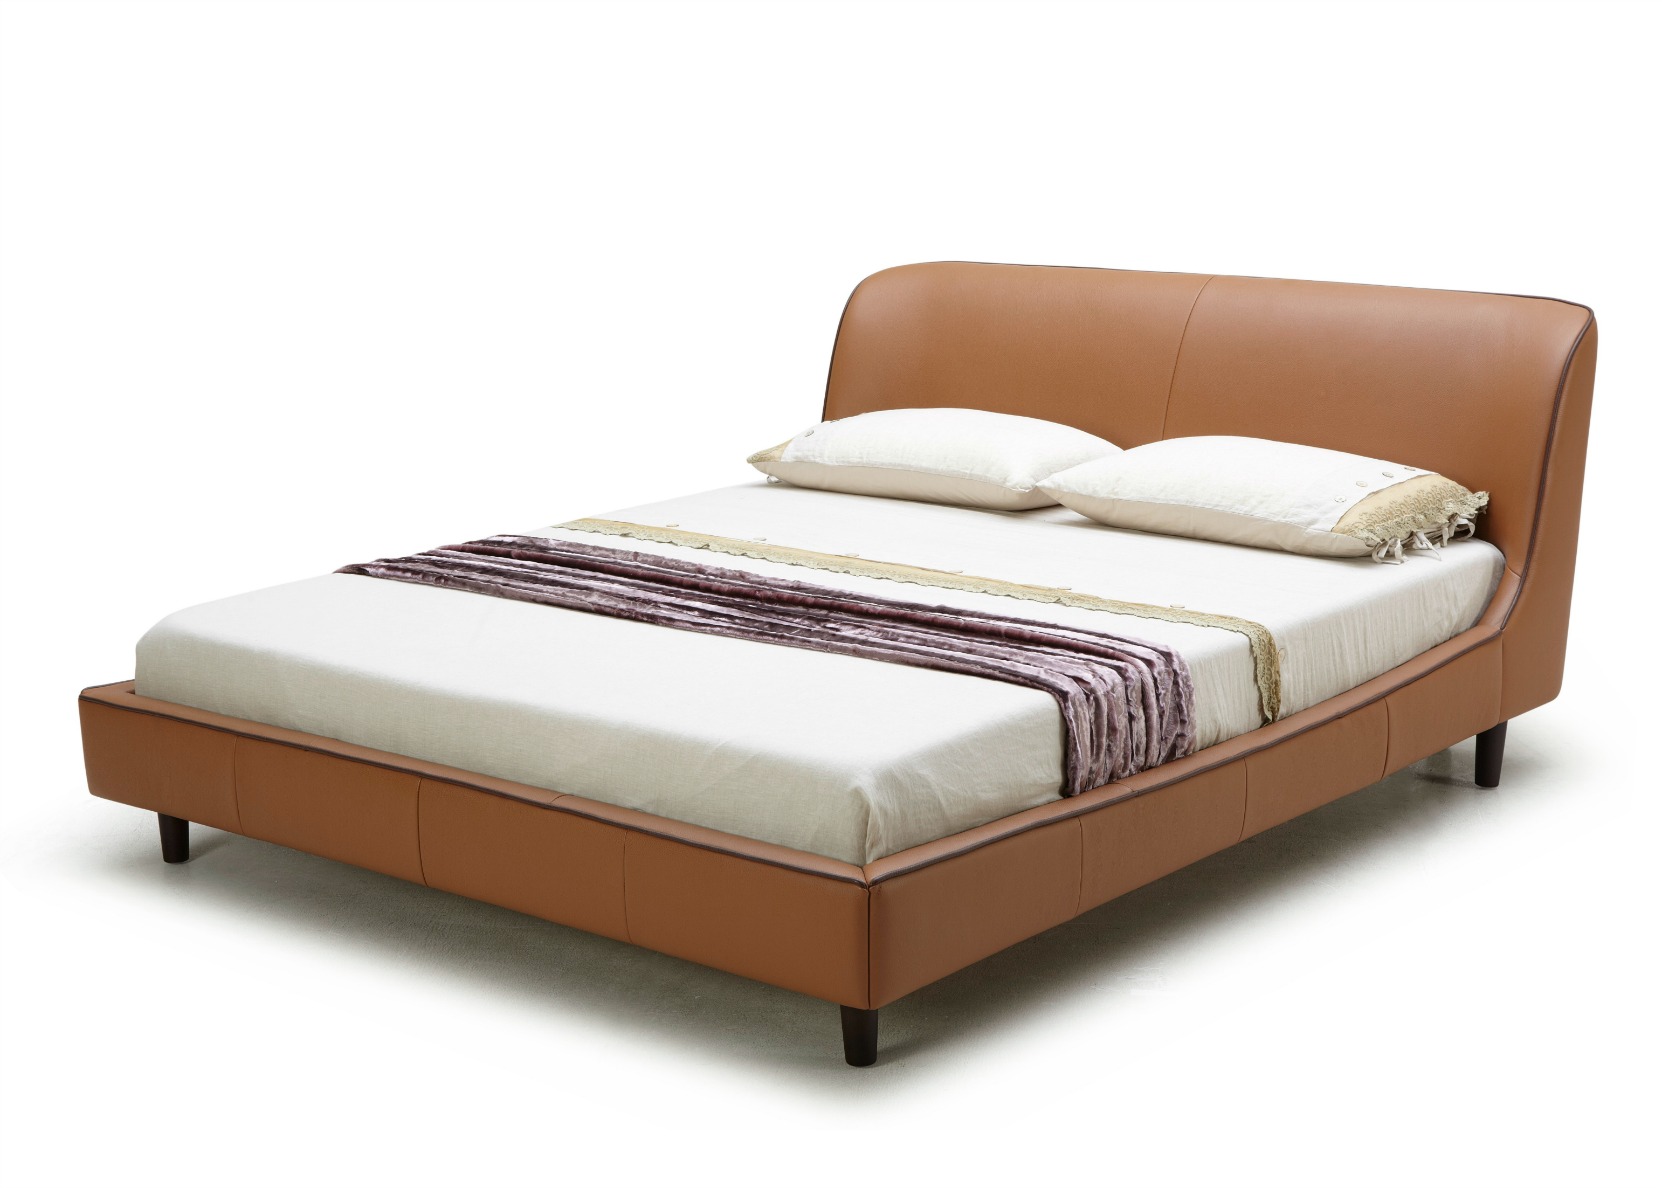 King Size Bed In Tan Leather Upholstery, Brown Suede Bed Frame